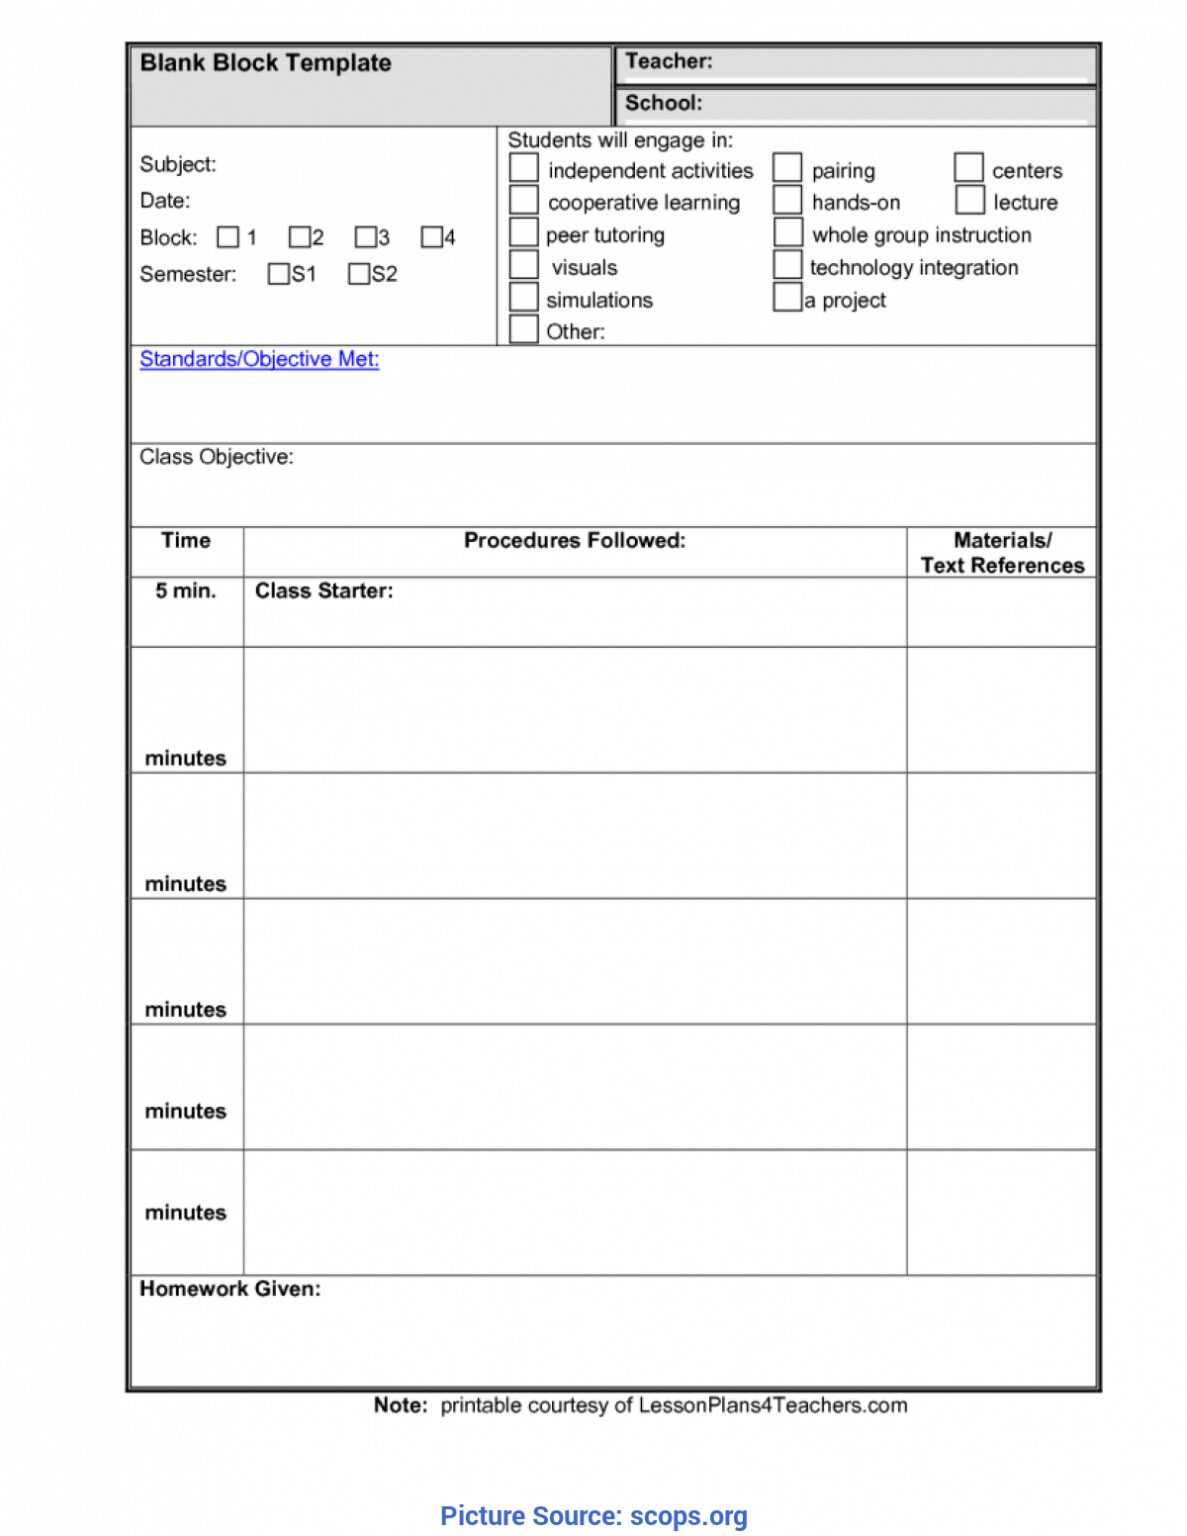 lesson-plans-blank-template-common-ota-tech-in-blank-unit-lesson